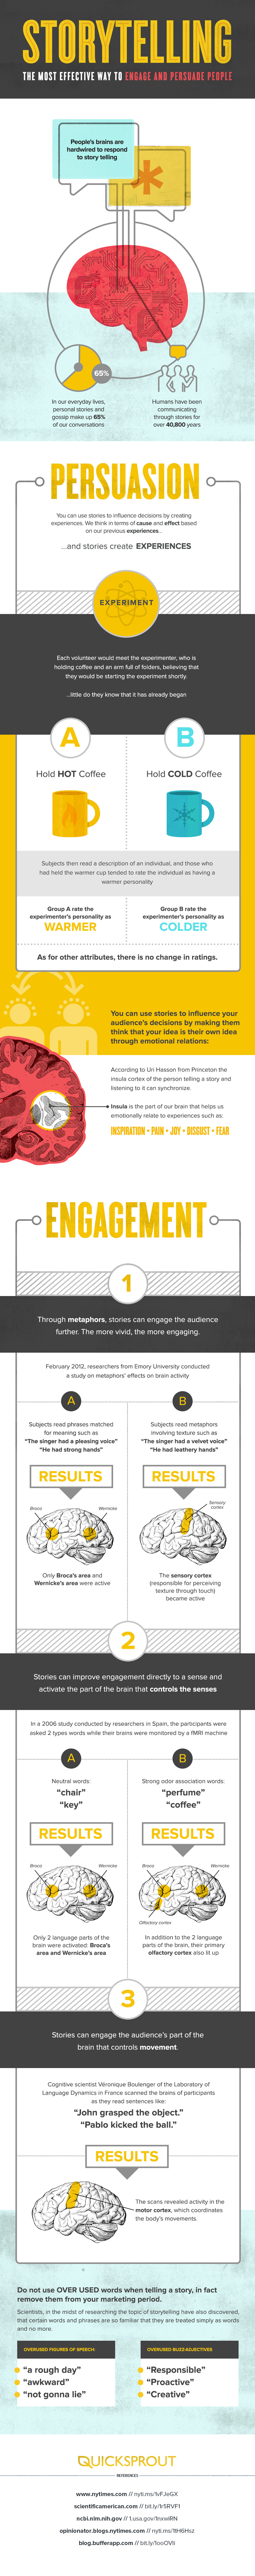 STORYTELLING THE MOST EFFECTIVE WAY TO ENGAGE AND PERSUADE PEOPLE #INFOGRAPHIC